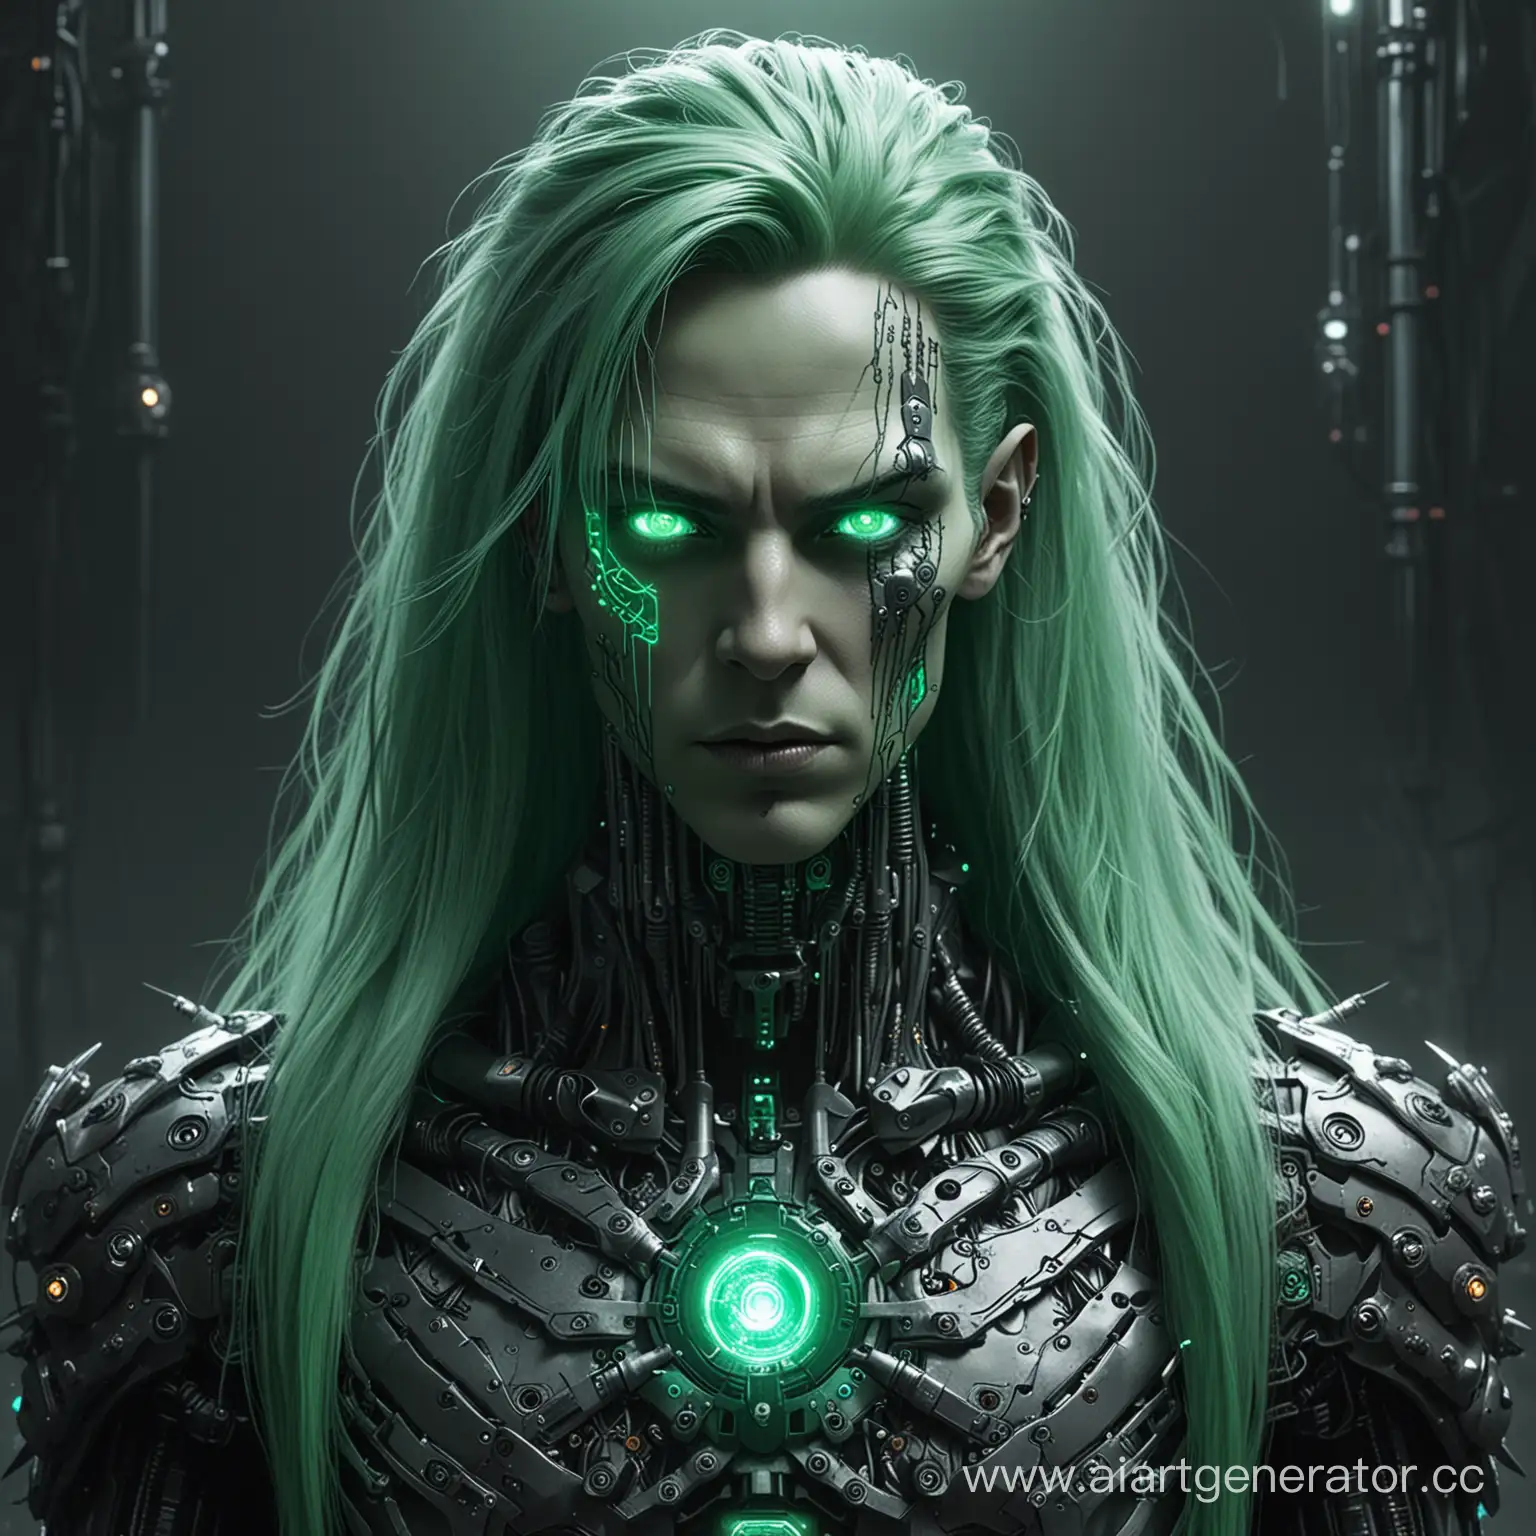 Underworld-Deity-with-Cybernetic-Enhancements-and-Luminous-Green-Tresses-in-Gothic-Cyberpunk-Aesthetic